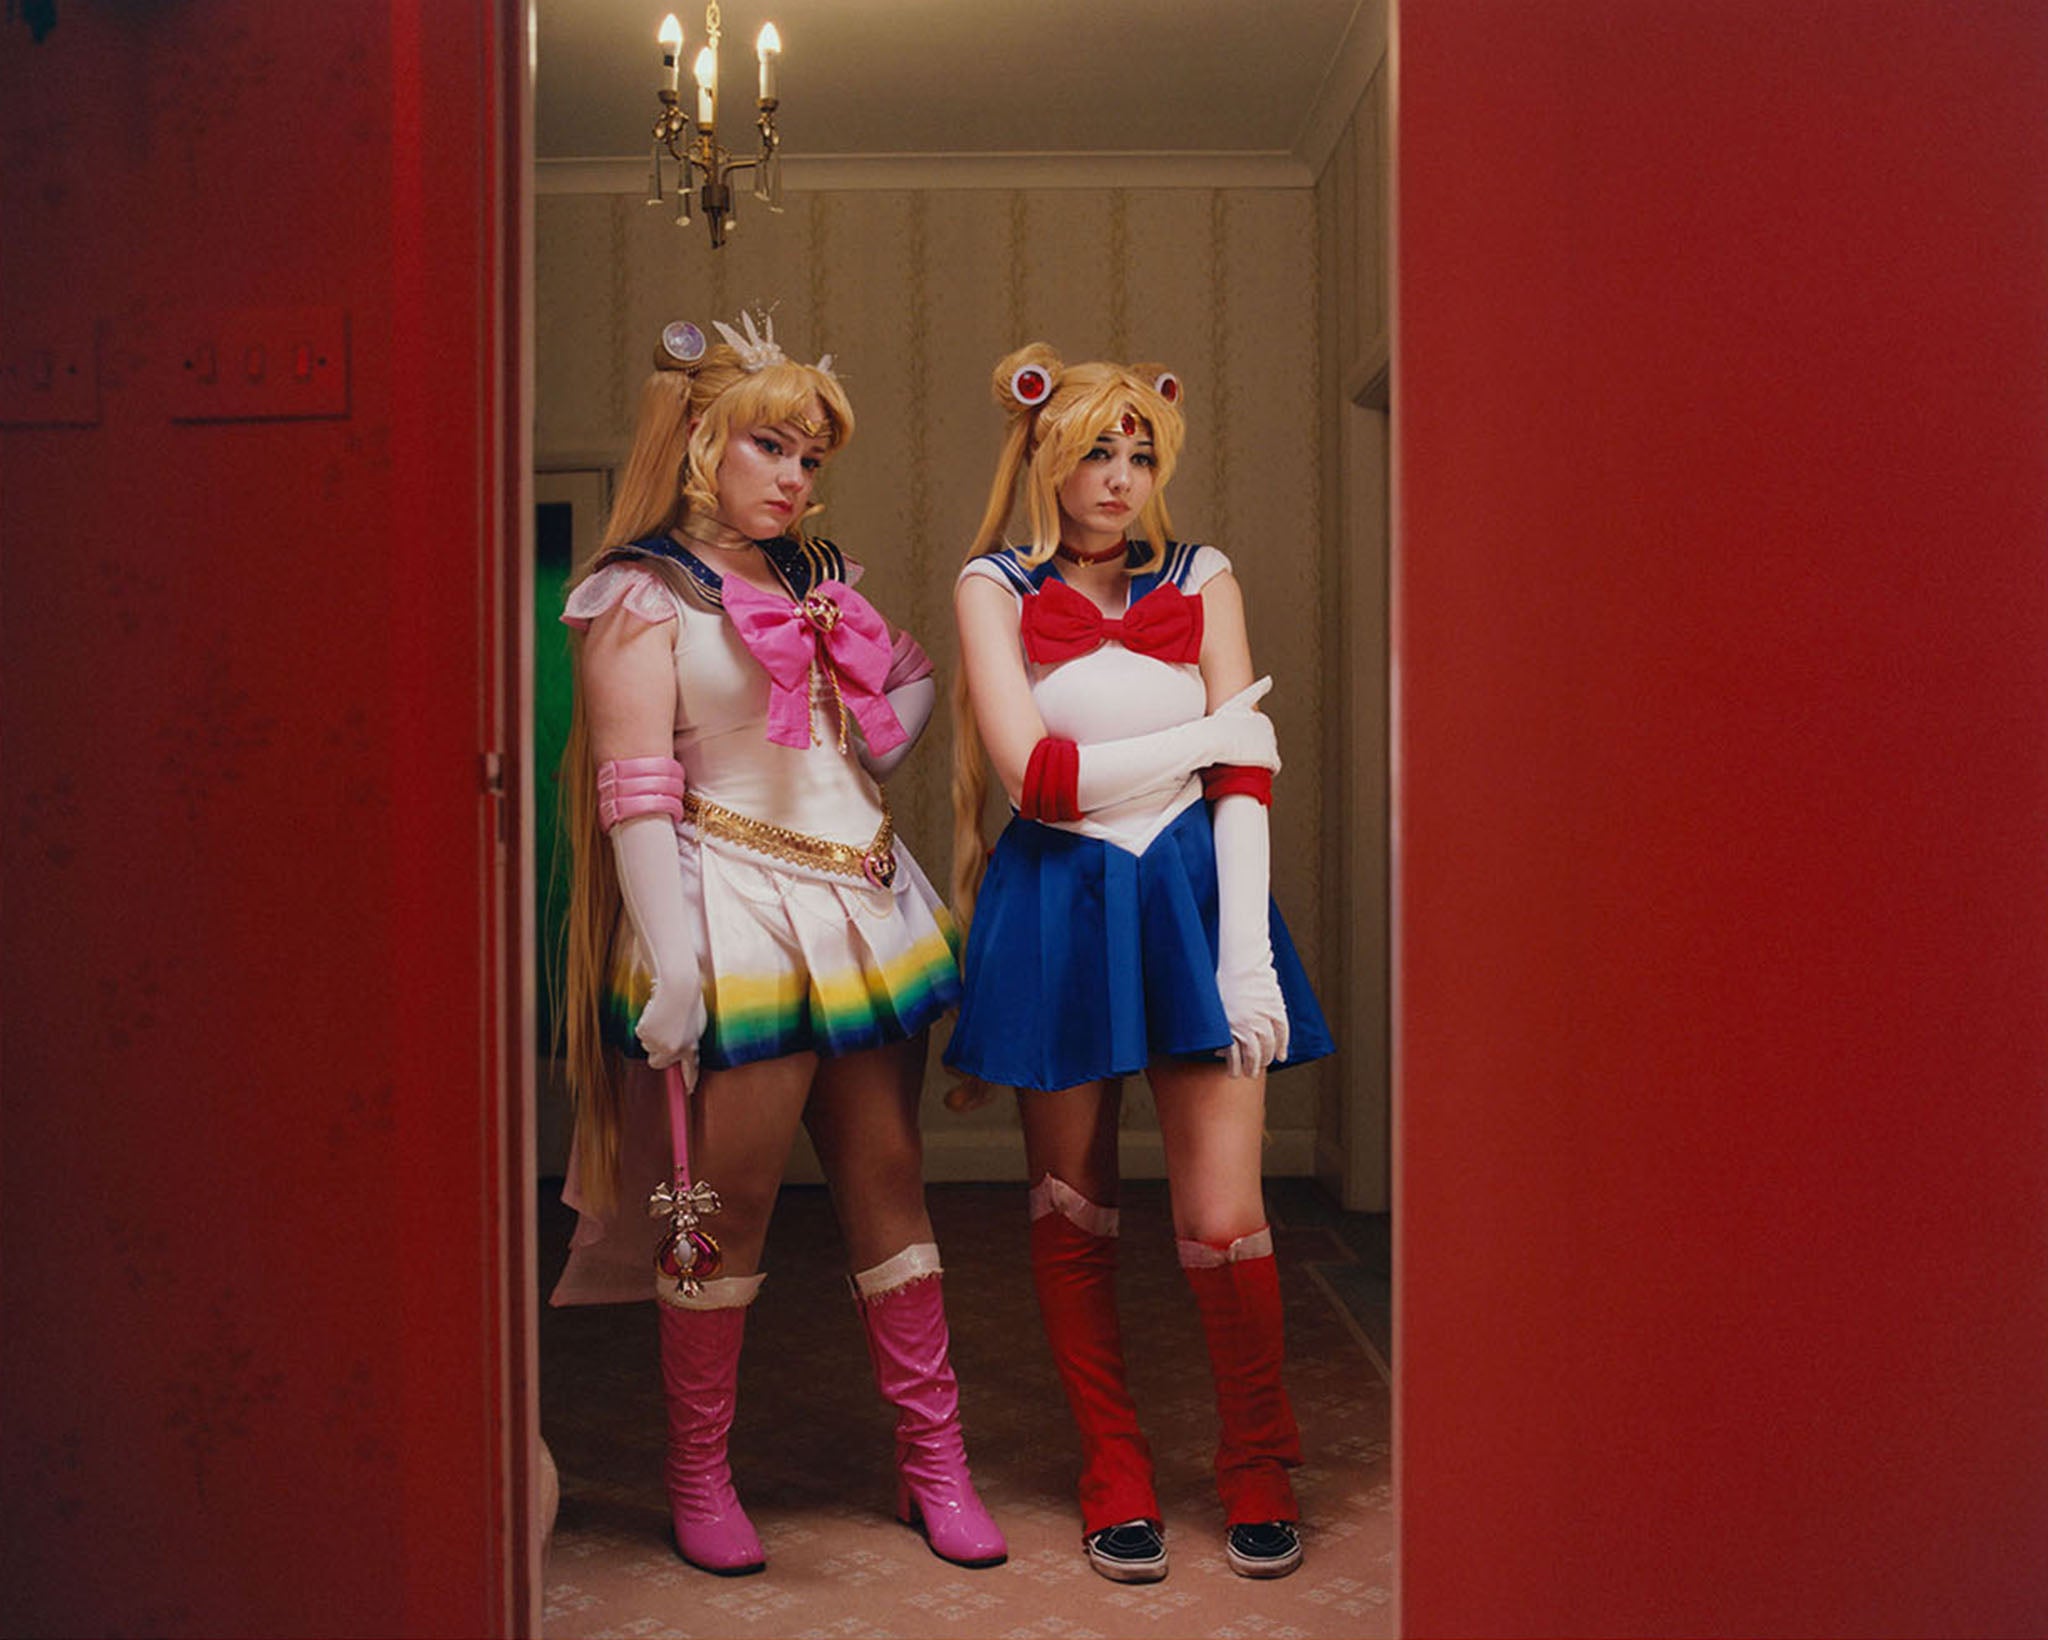 A student and a professional cosplayer as anime character Sailor Moon